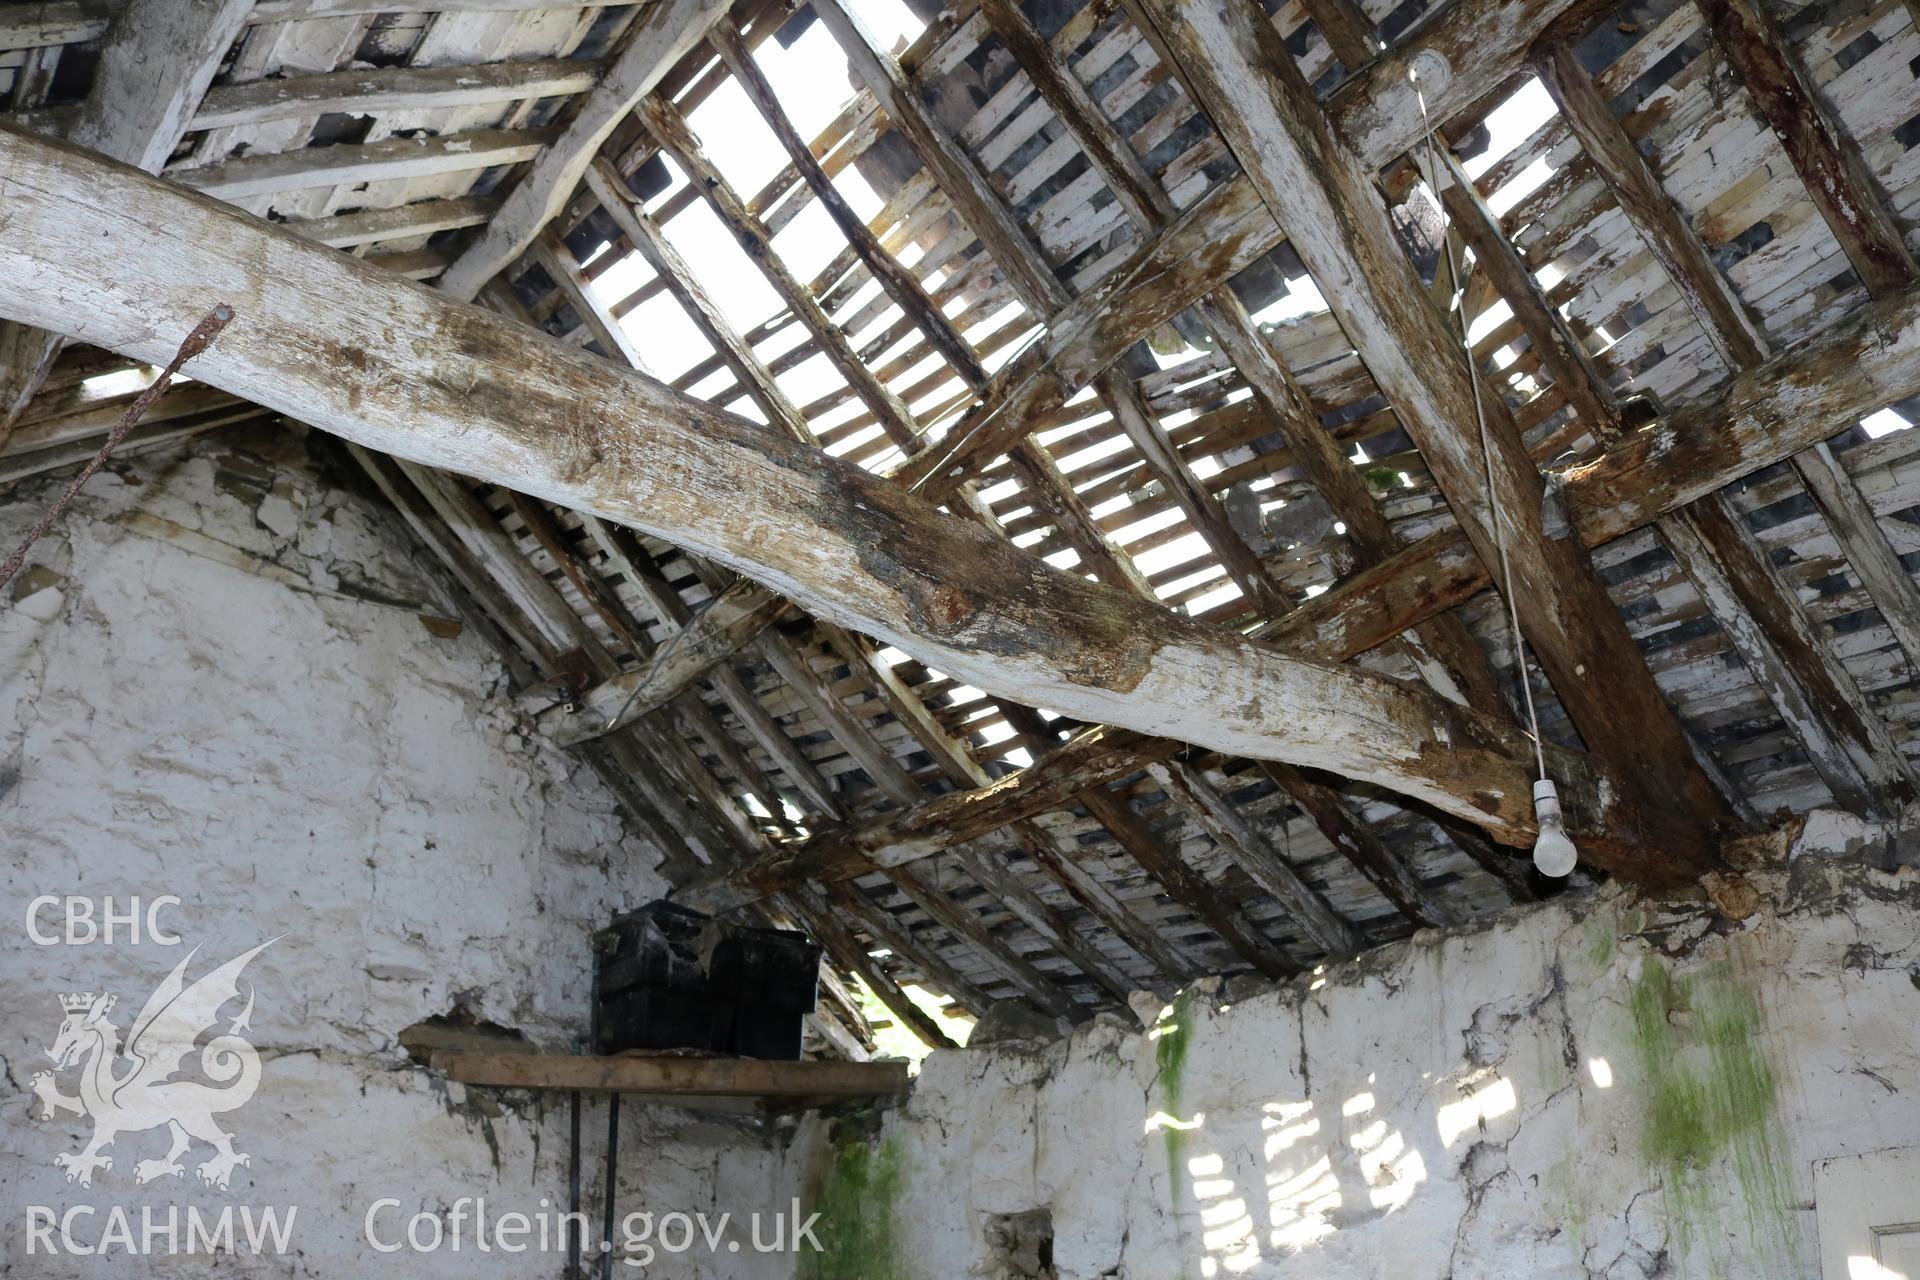 Photograph showing interior view of dairy roof, at Maes yr Hendre, taken by Dr Marian Gwyn, 6th July 2016. (Original Reference no. 0248)